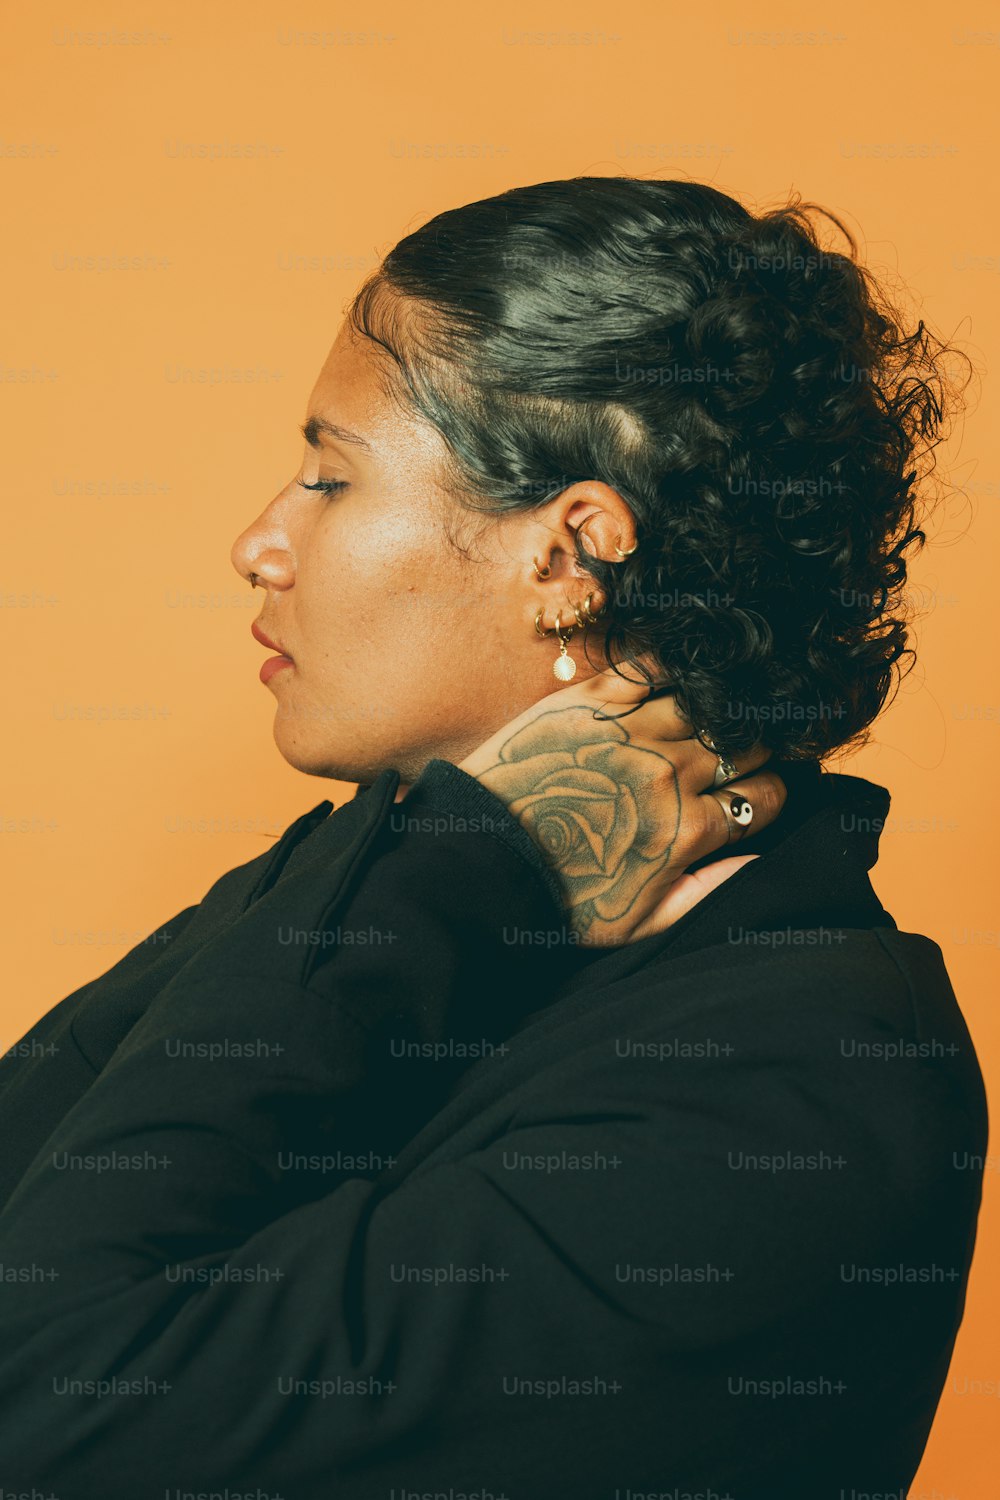 a woman with a tattoo on her neck